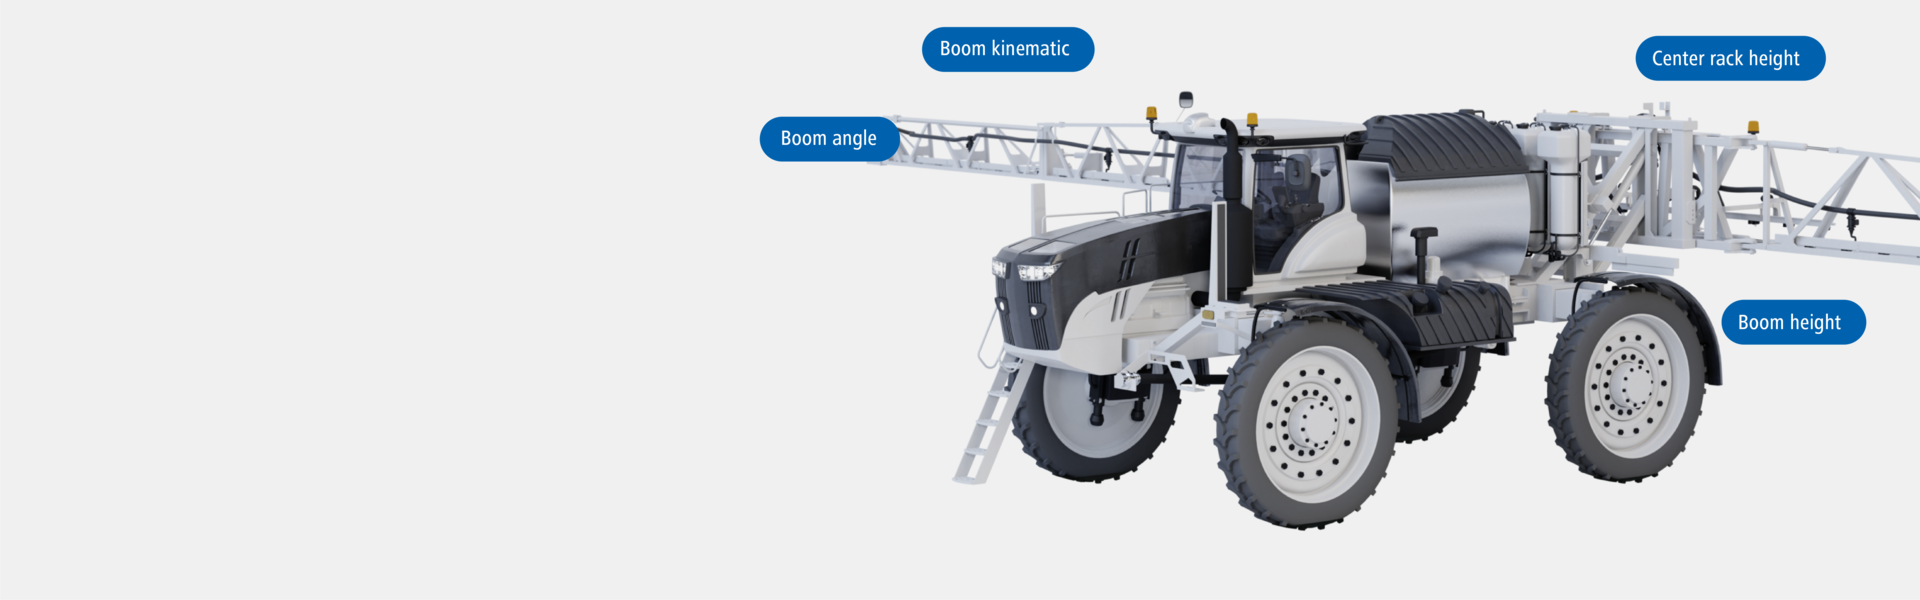 EN-Zchn-Overview-Mobile-Automation-SprayerBoomHeightAgri-bg-screen-1-.png